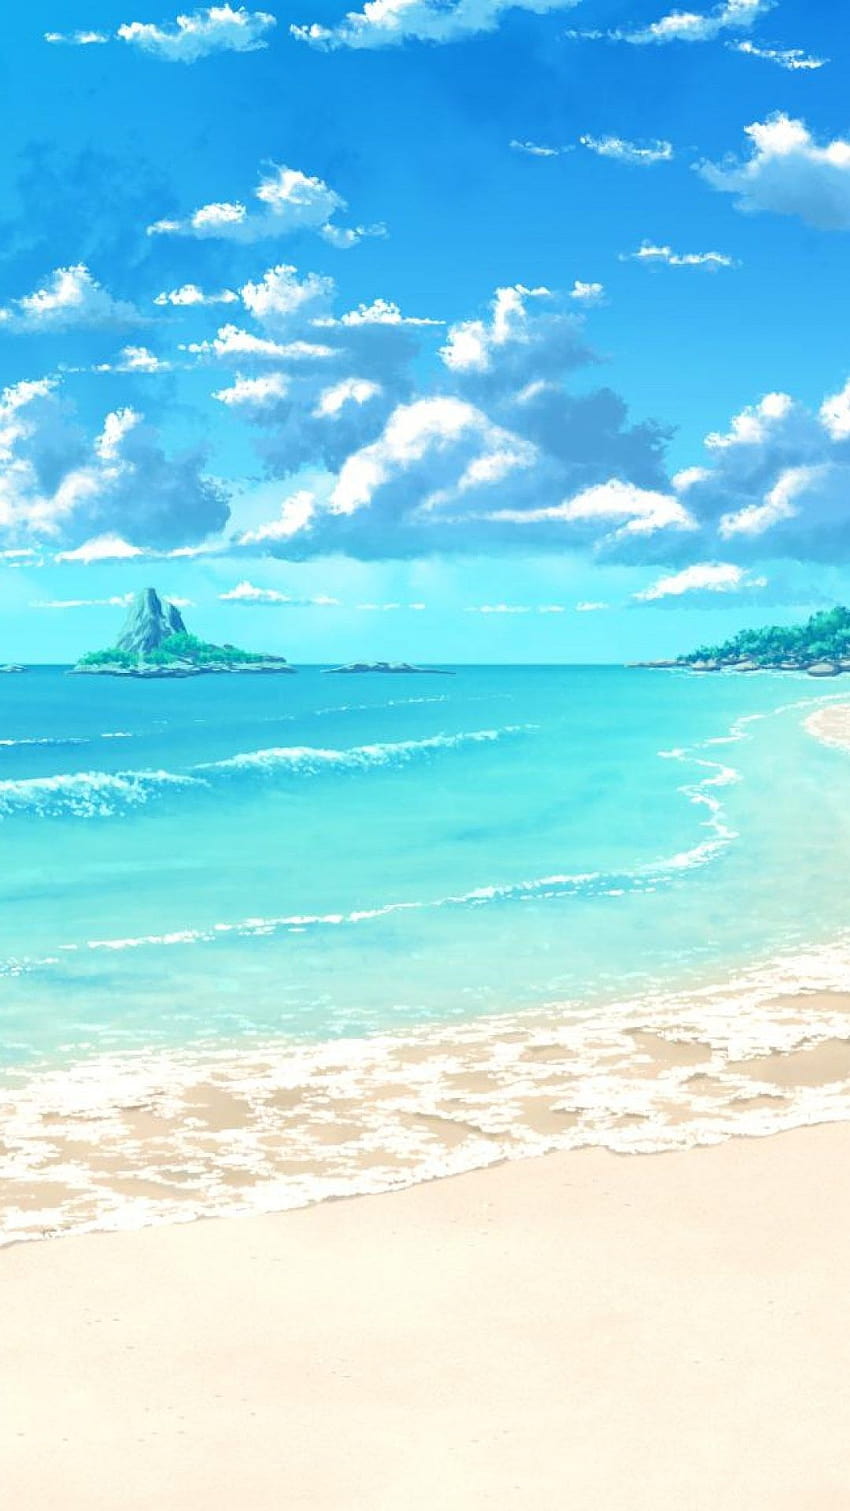 100+] Anime Beach Wallpapers | Wallpapers.com